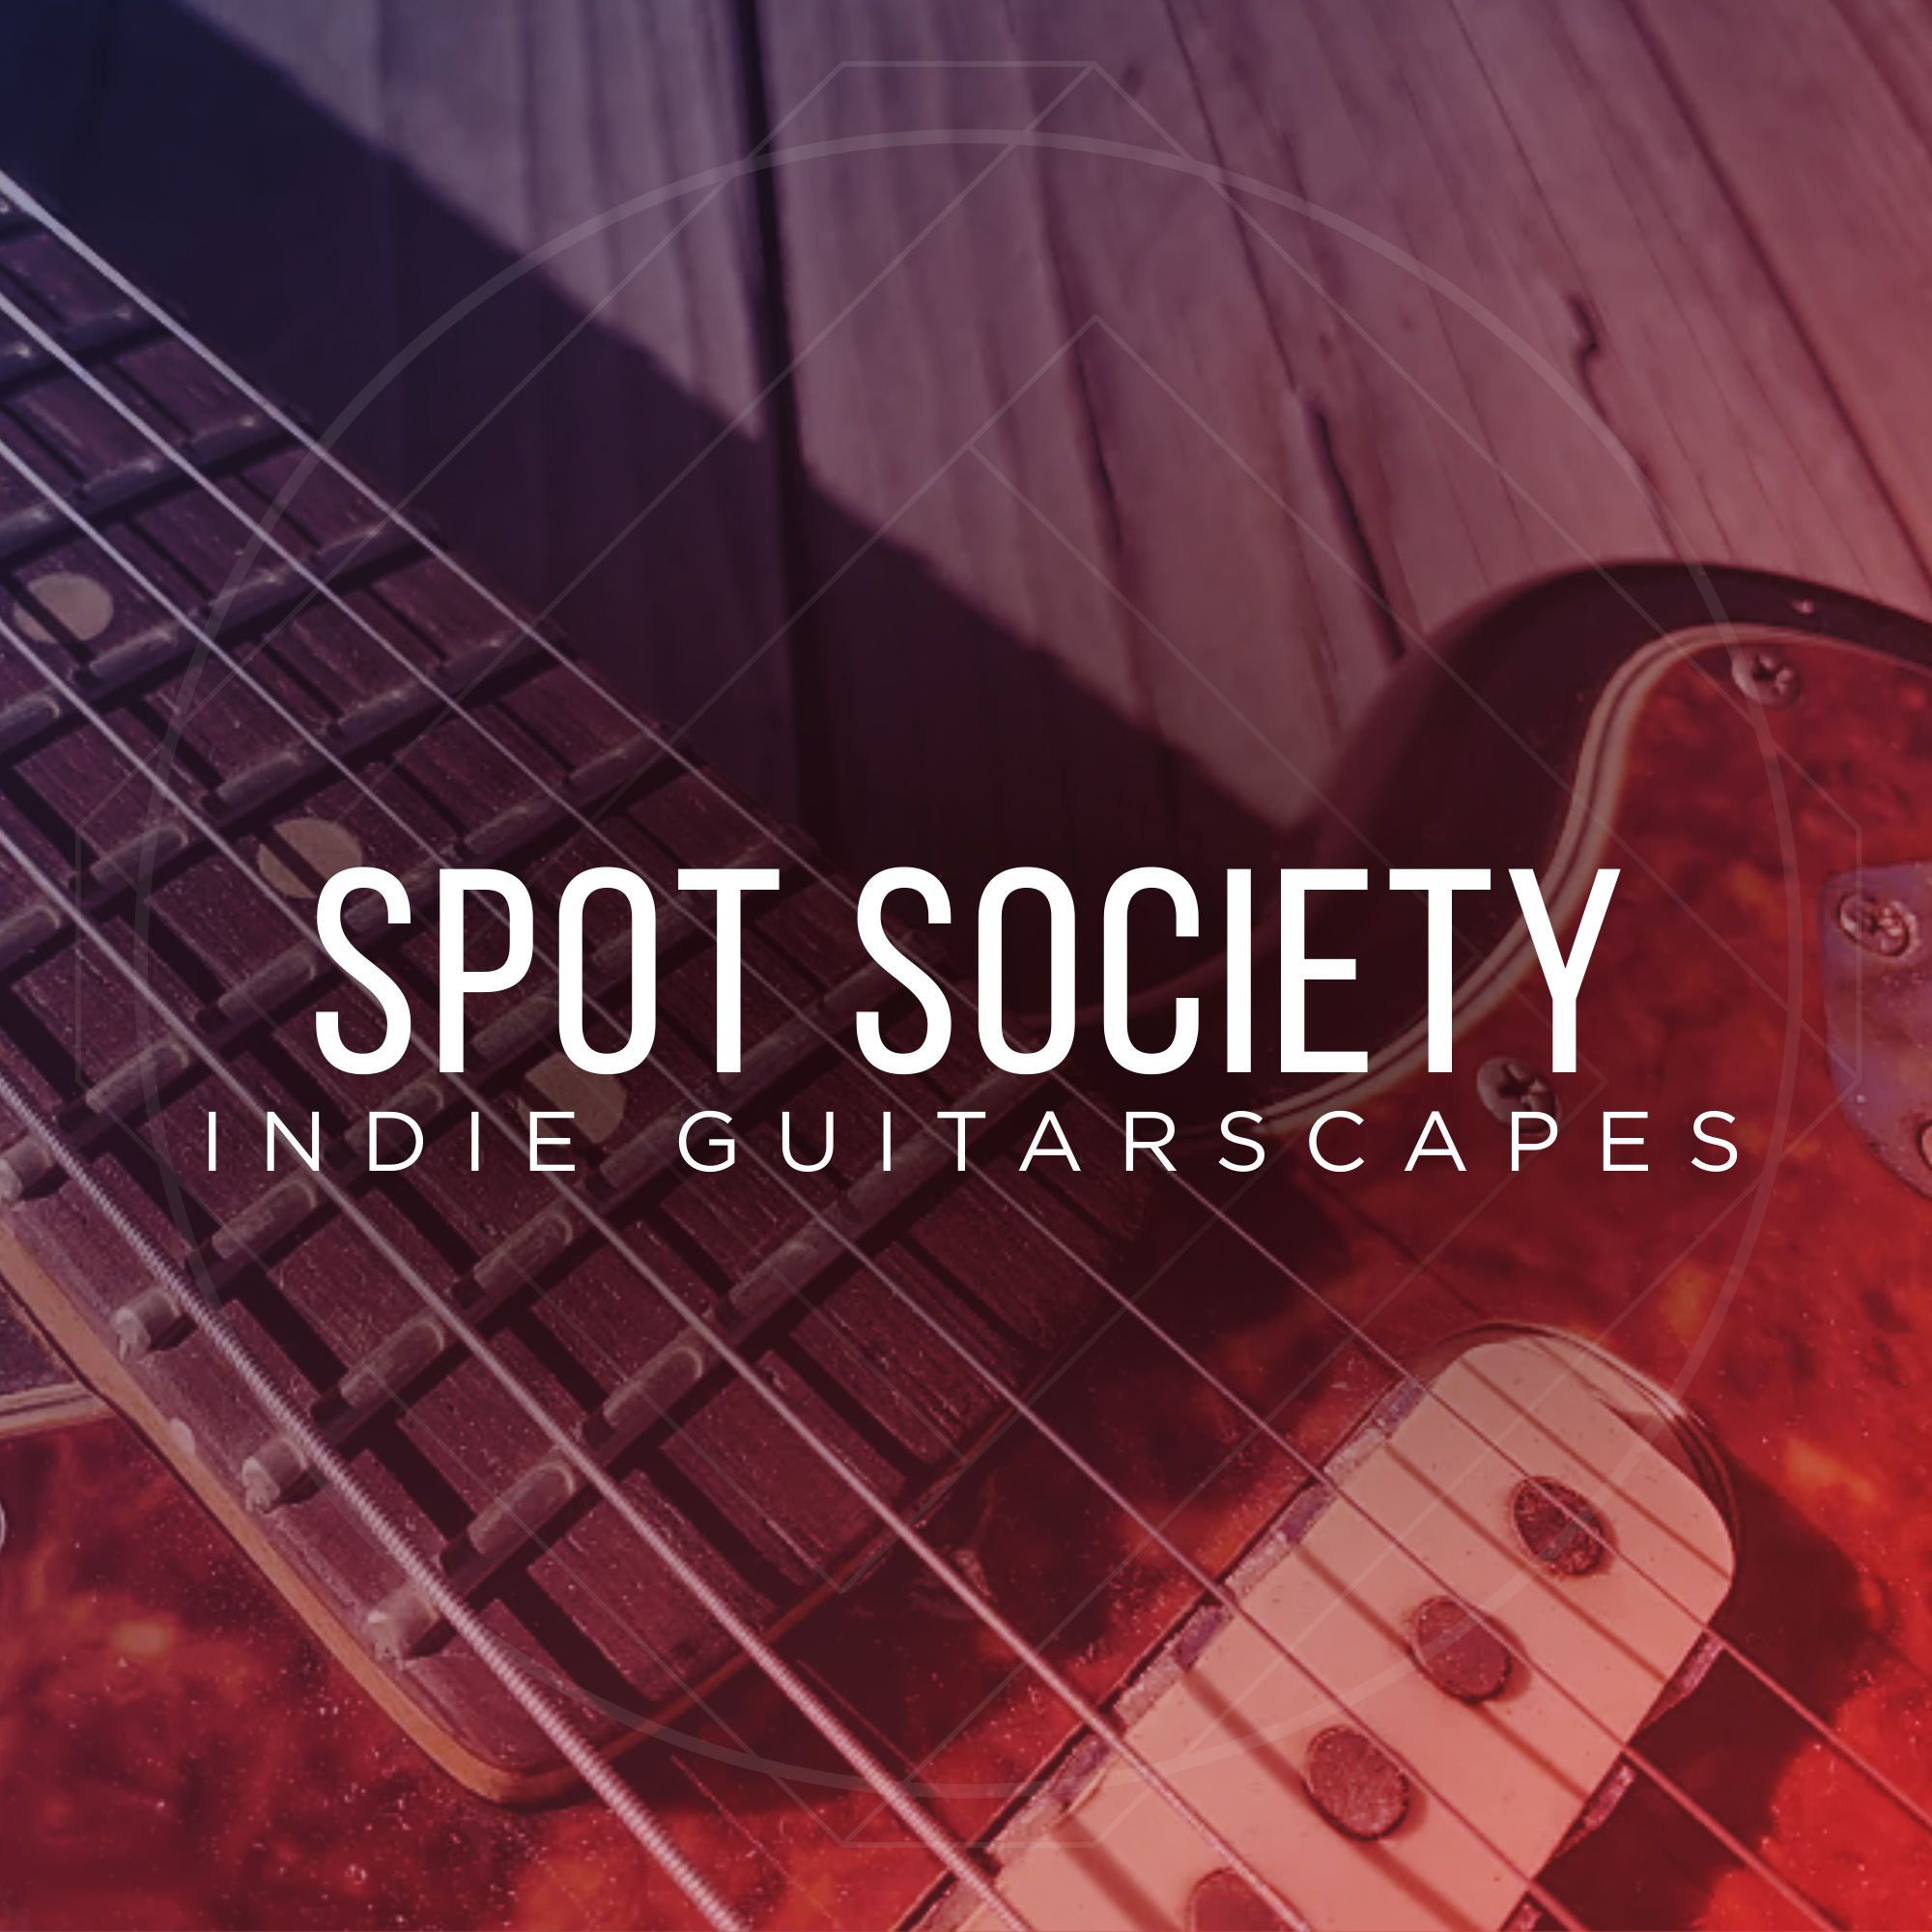 Indie Guitarscapes